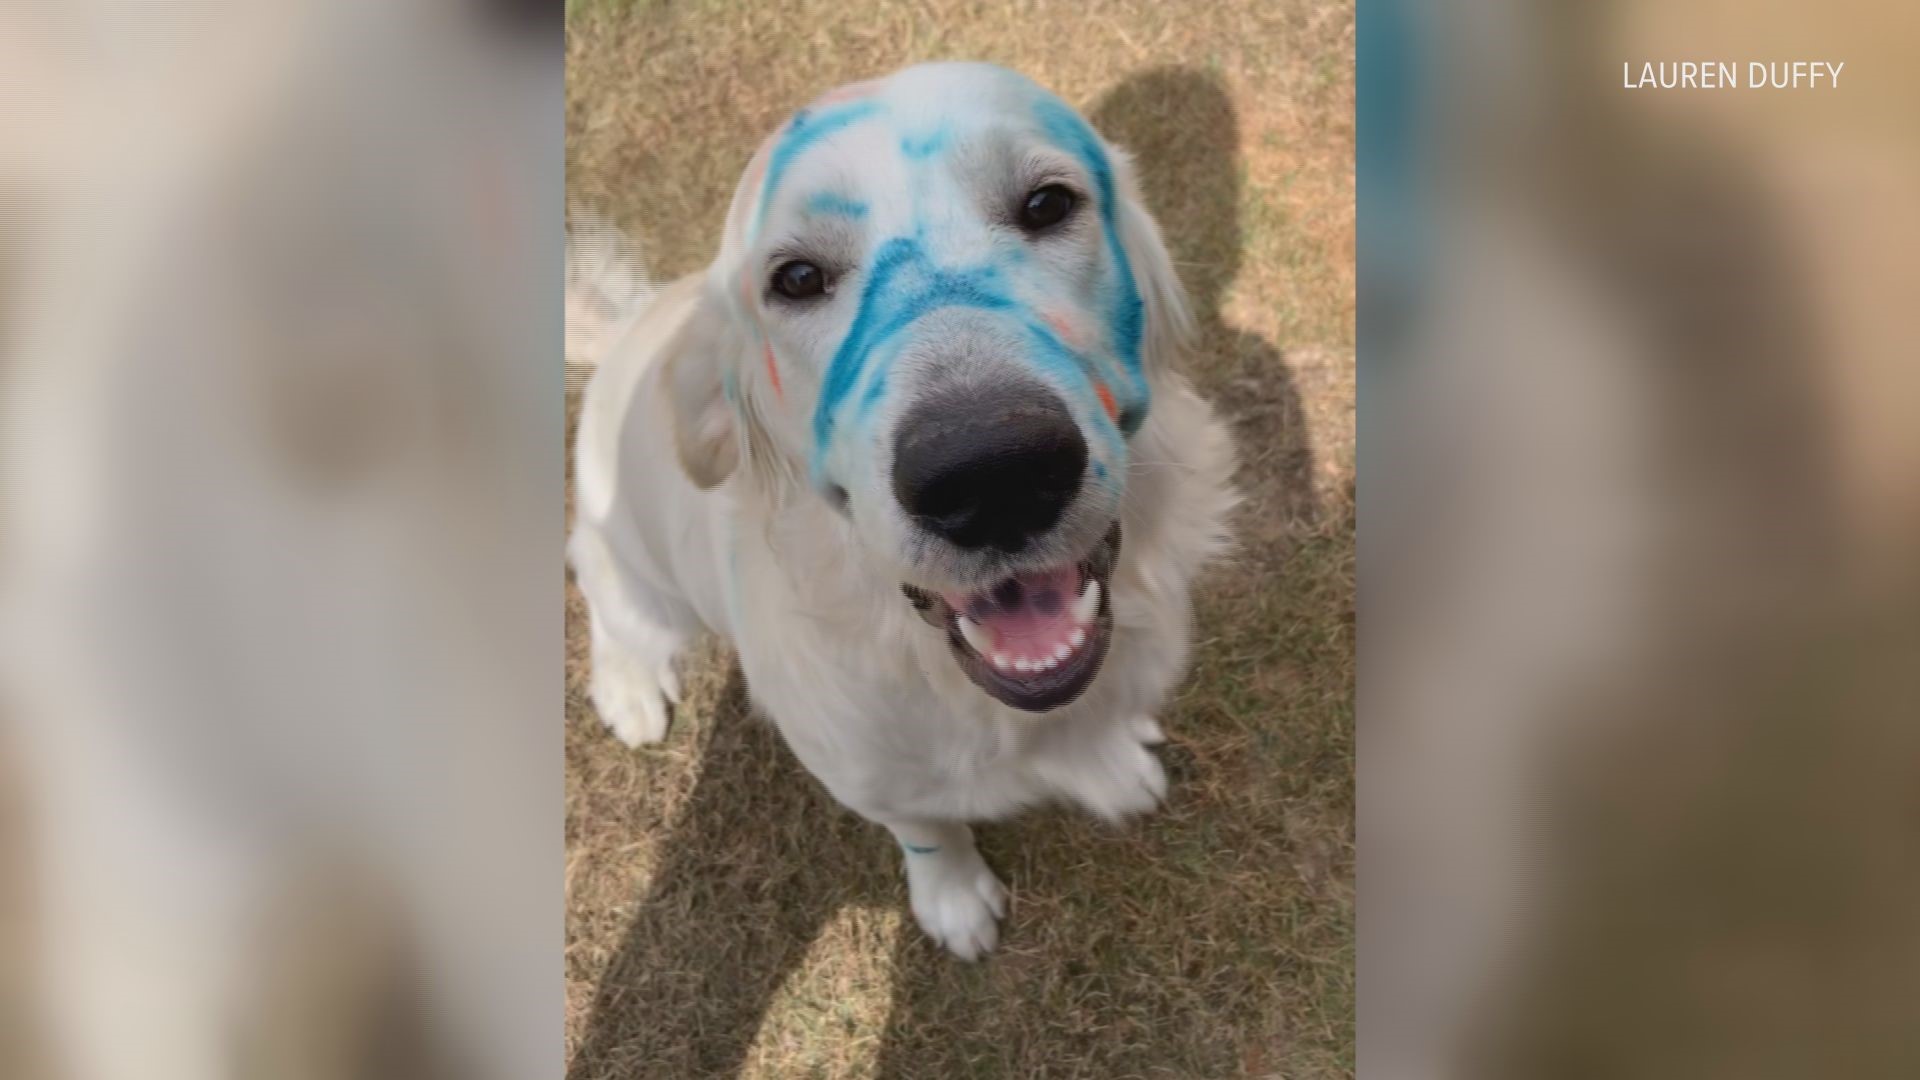 Larry the dog seemed very excited when his owner found him blue in the face. From a pile of melted crayons.